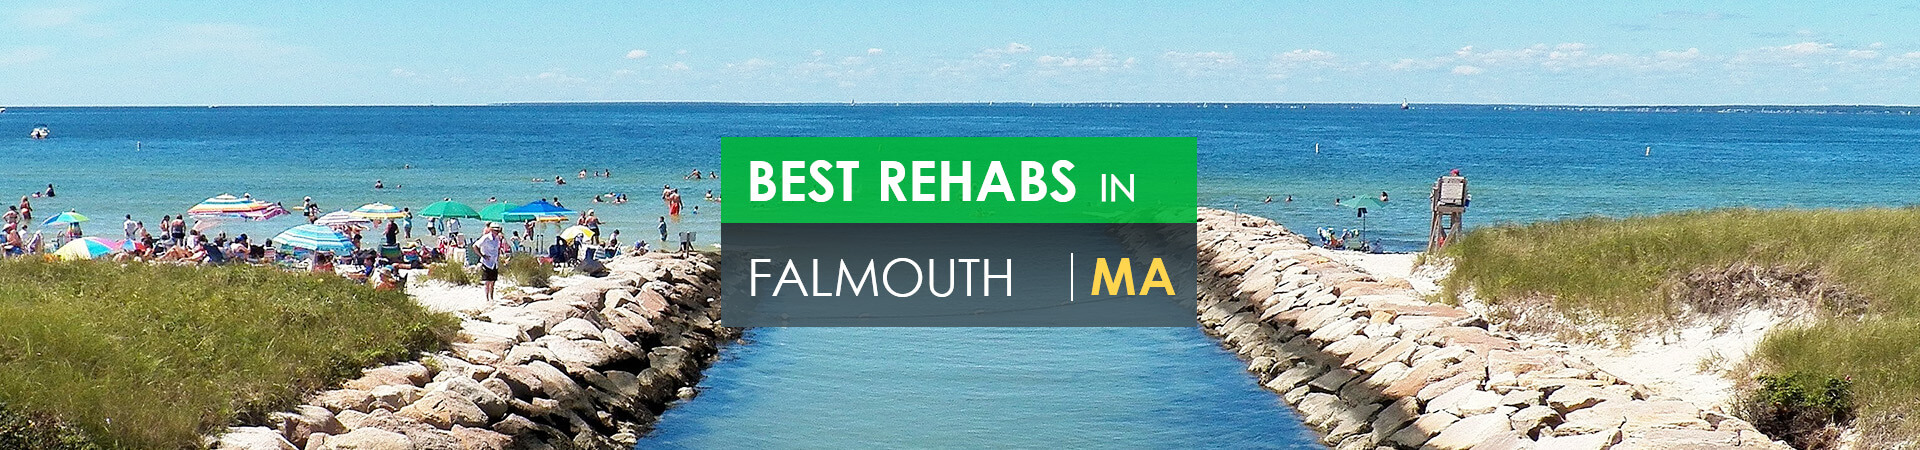 Best rehabs in Falmouth, MA